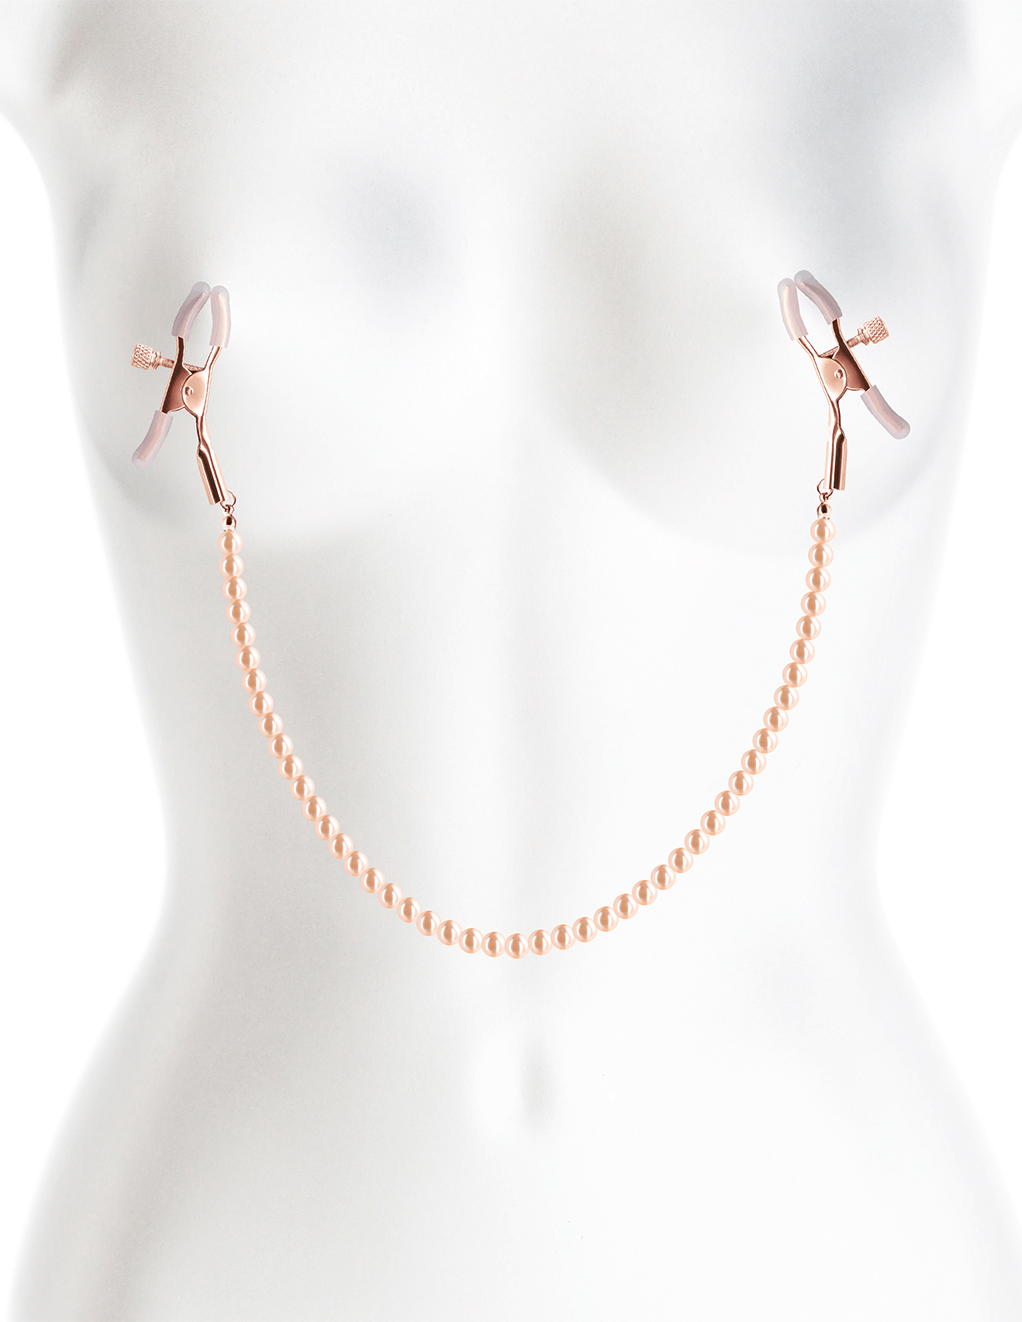 Adjustable Pearl Chain Clamps DC1 - Rose Gold Clamps